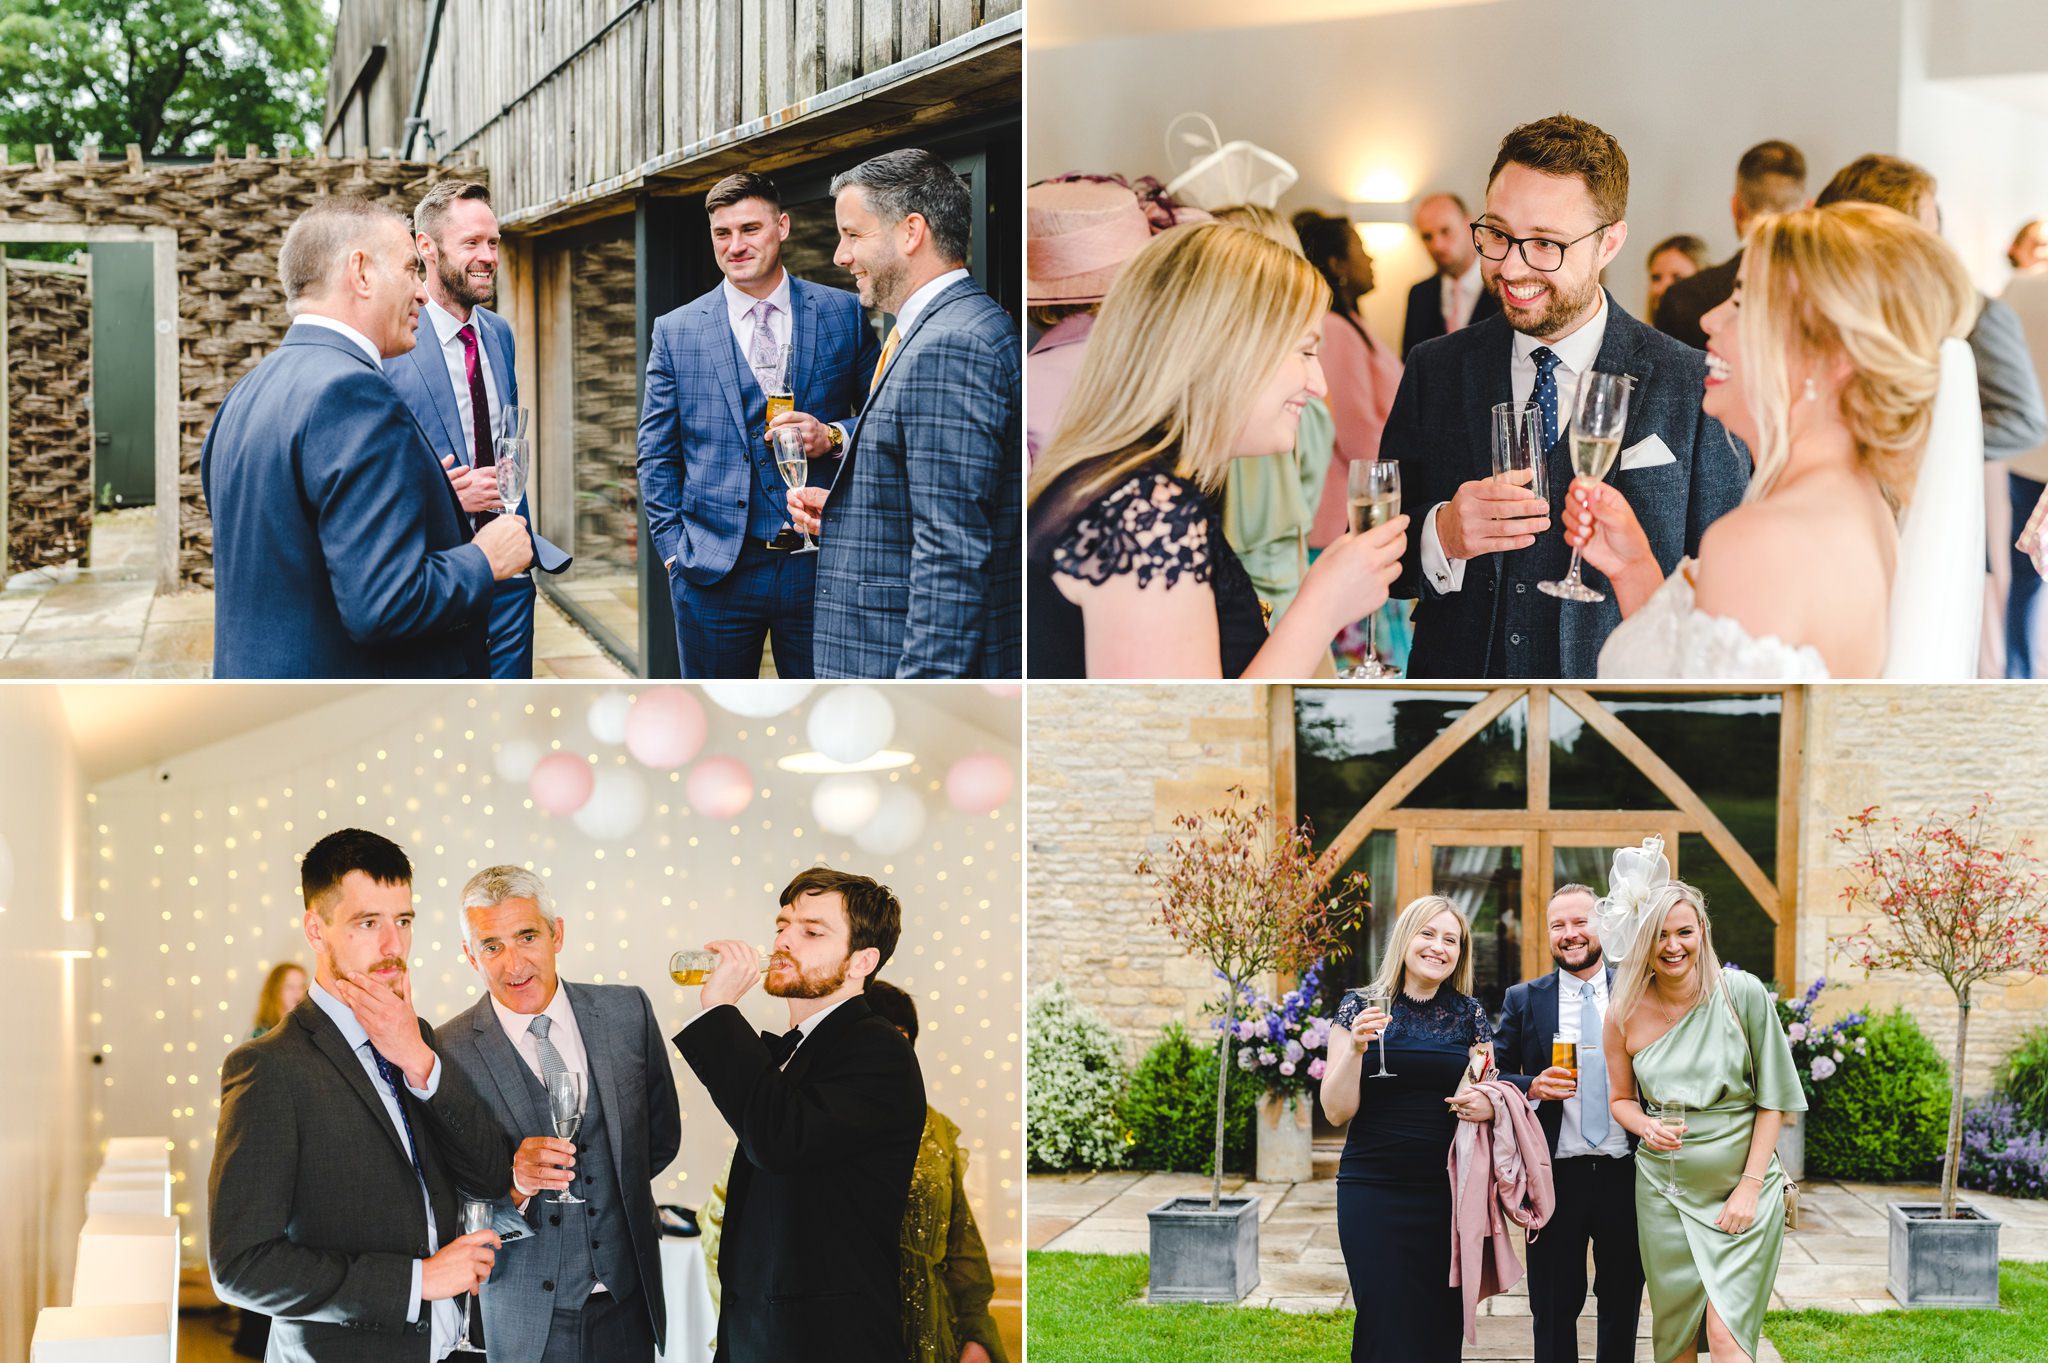 Guests gathering for a drinks reception in the courtyard at The Barn at Upcote